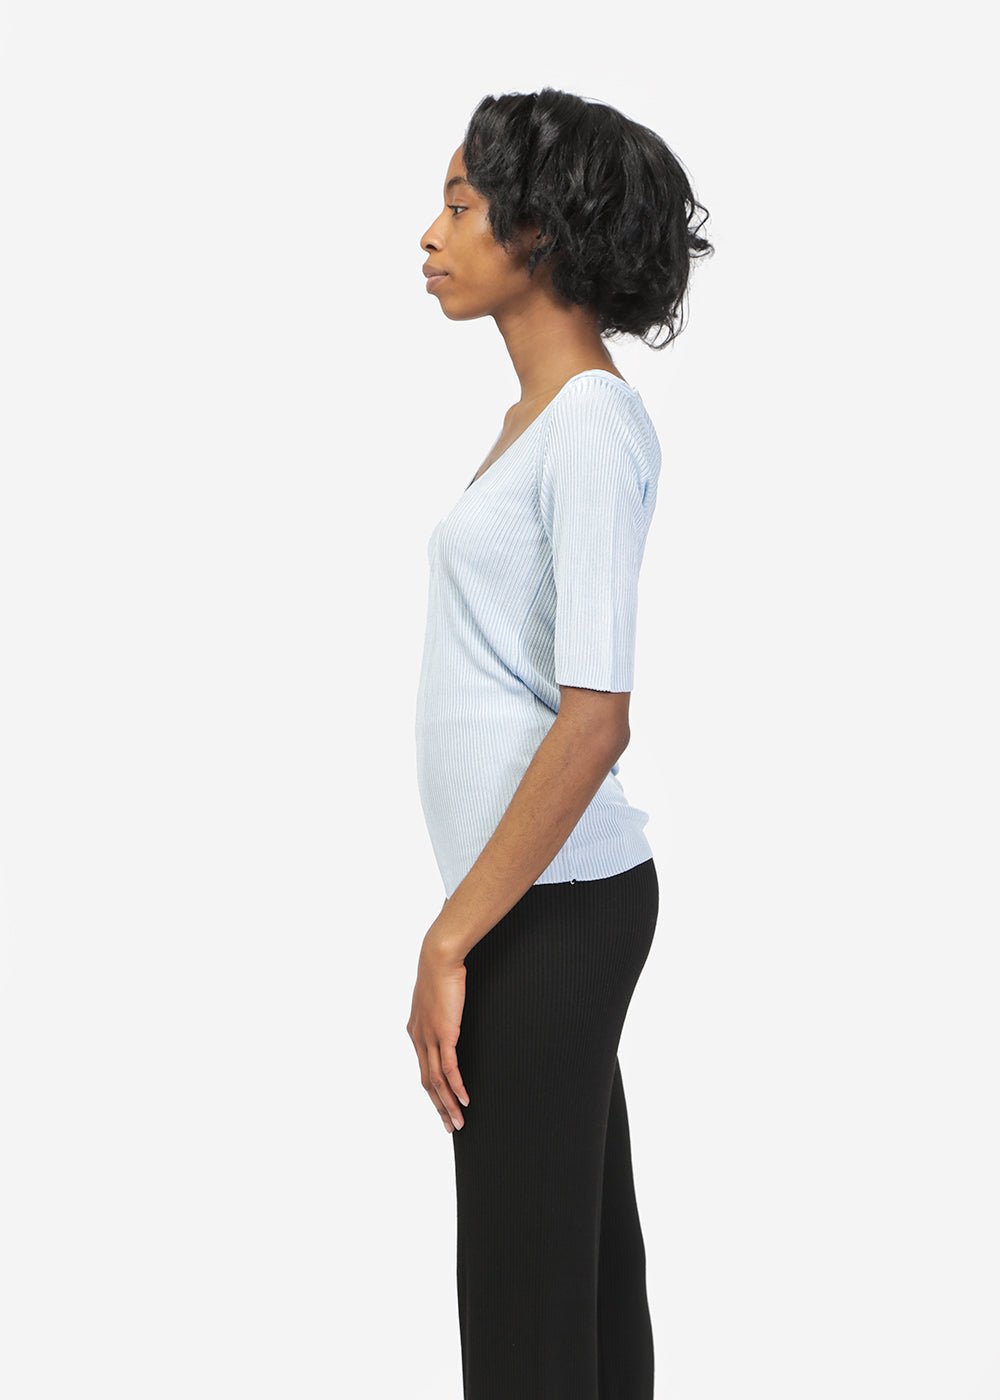 Suzanne Rae Short Sleeve Scoop Neck Knit - New Classics Studios Sustainable Ethical Fashion Canada